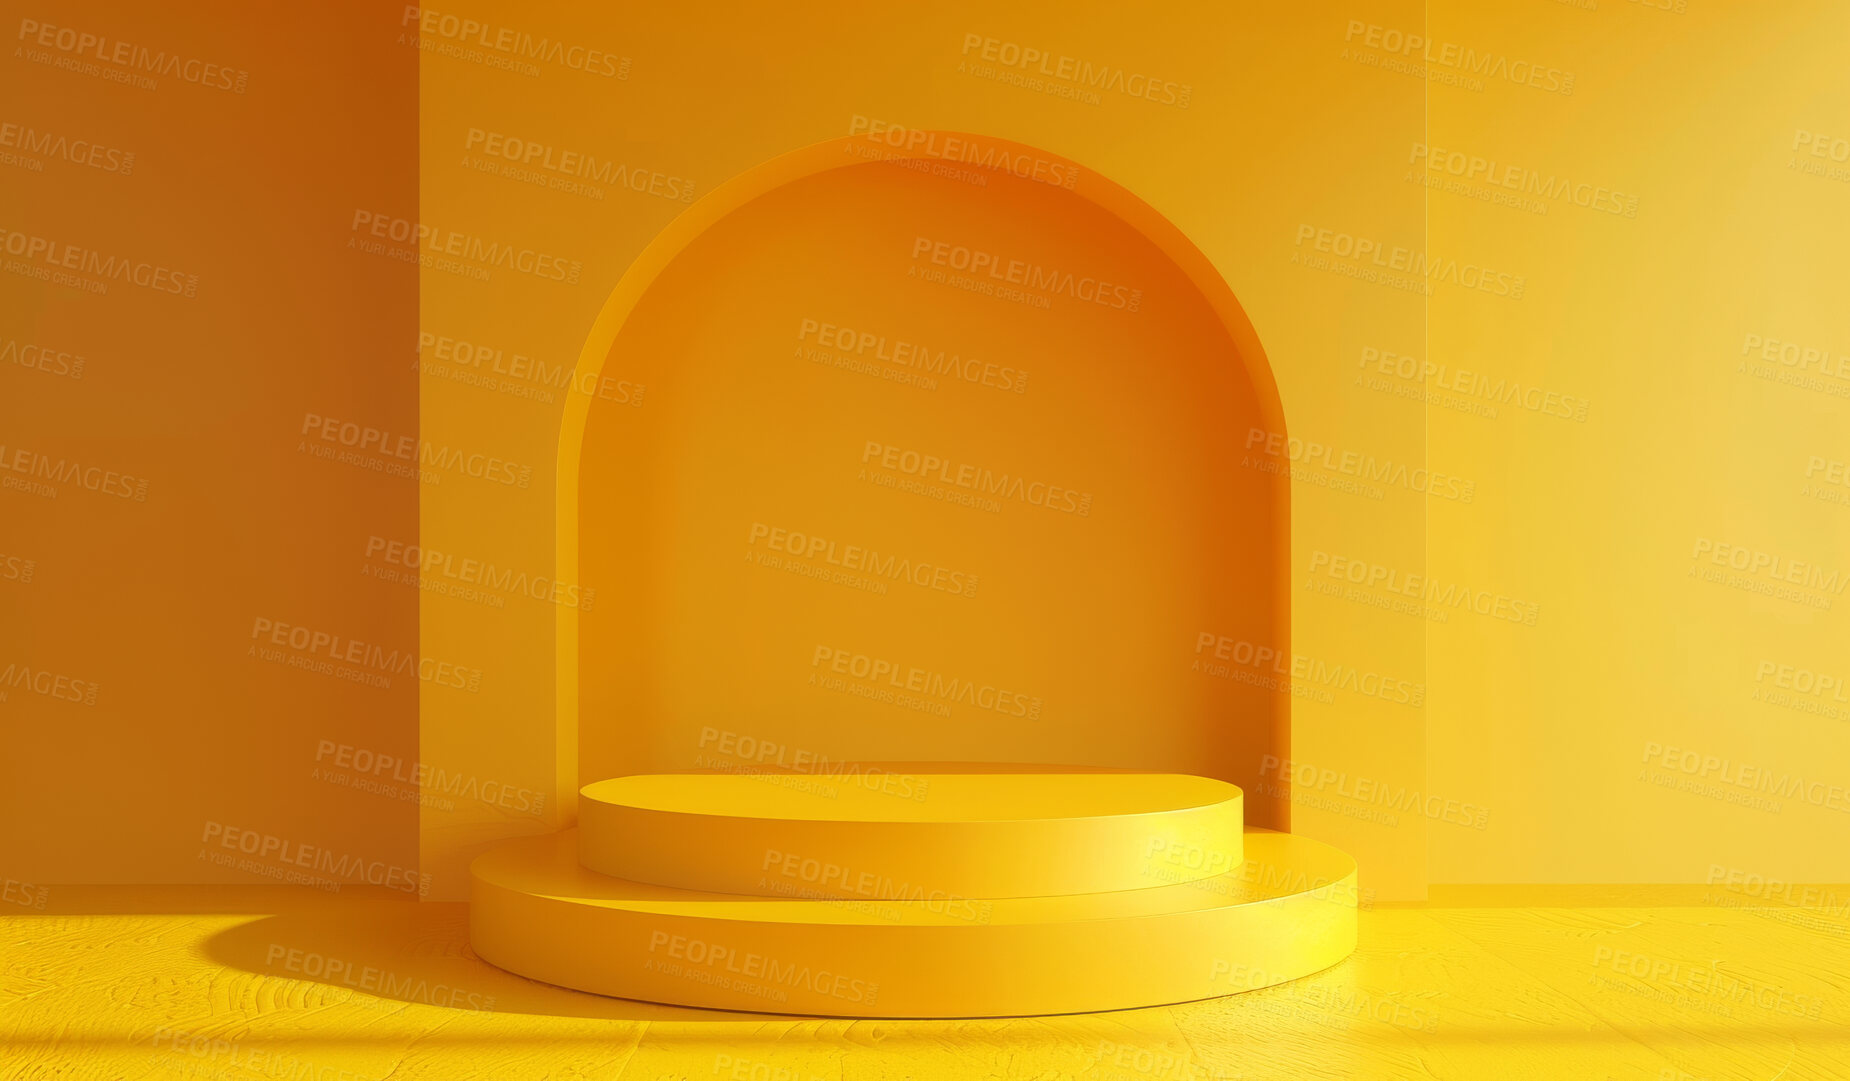 Buy stock photo Podium, yellow or stage design template for your product placement, advertising or marketing backdrop. Empty, modern and beautiful platform for business branding, background or showroom mockup